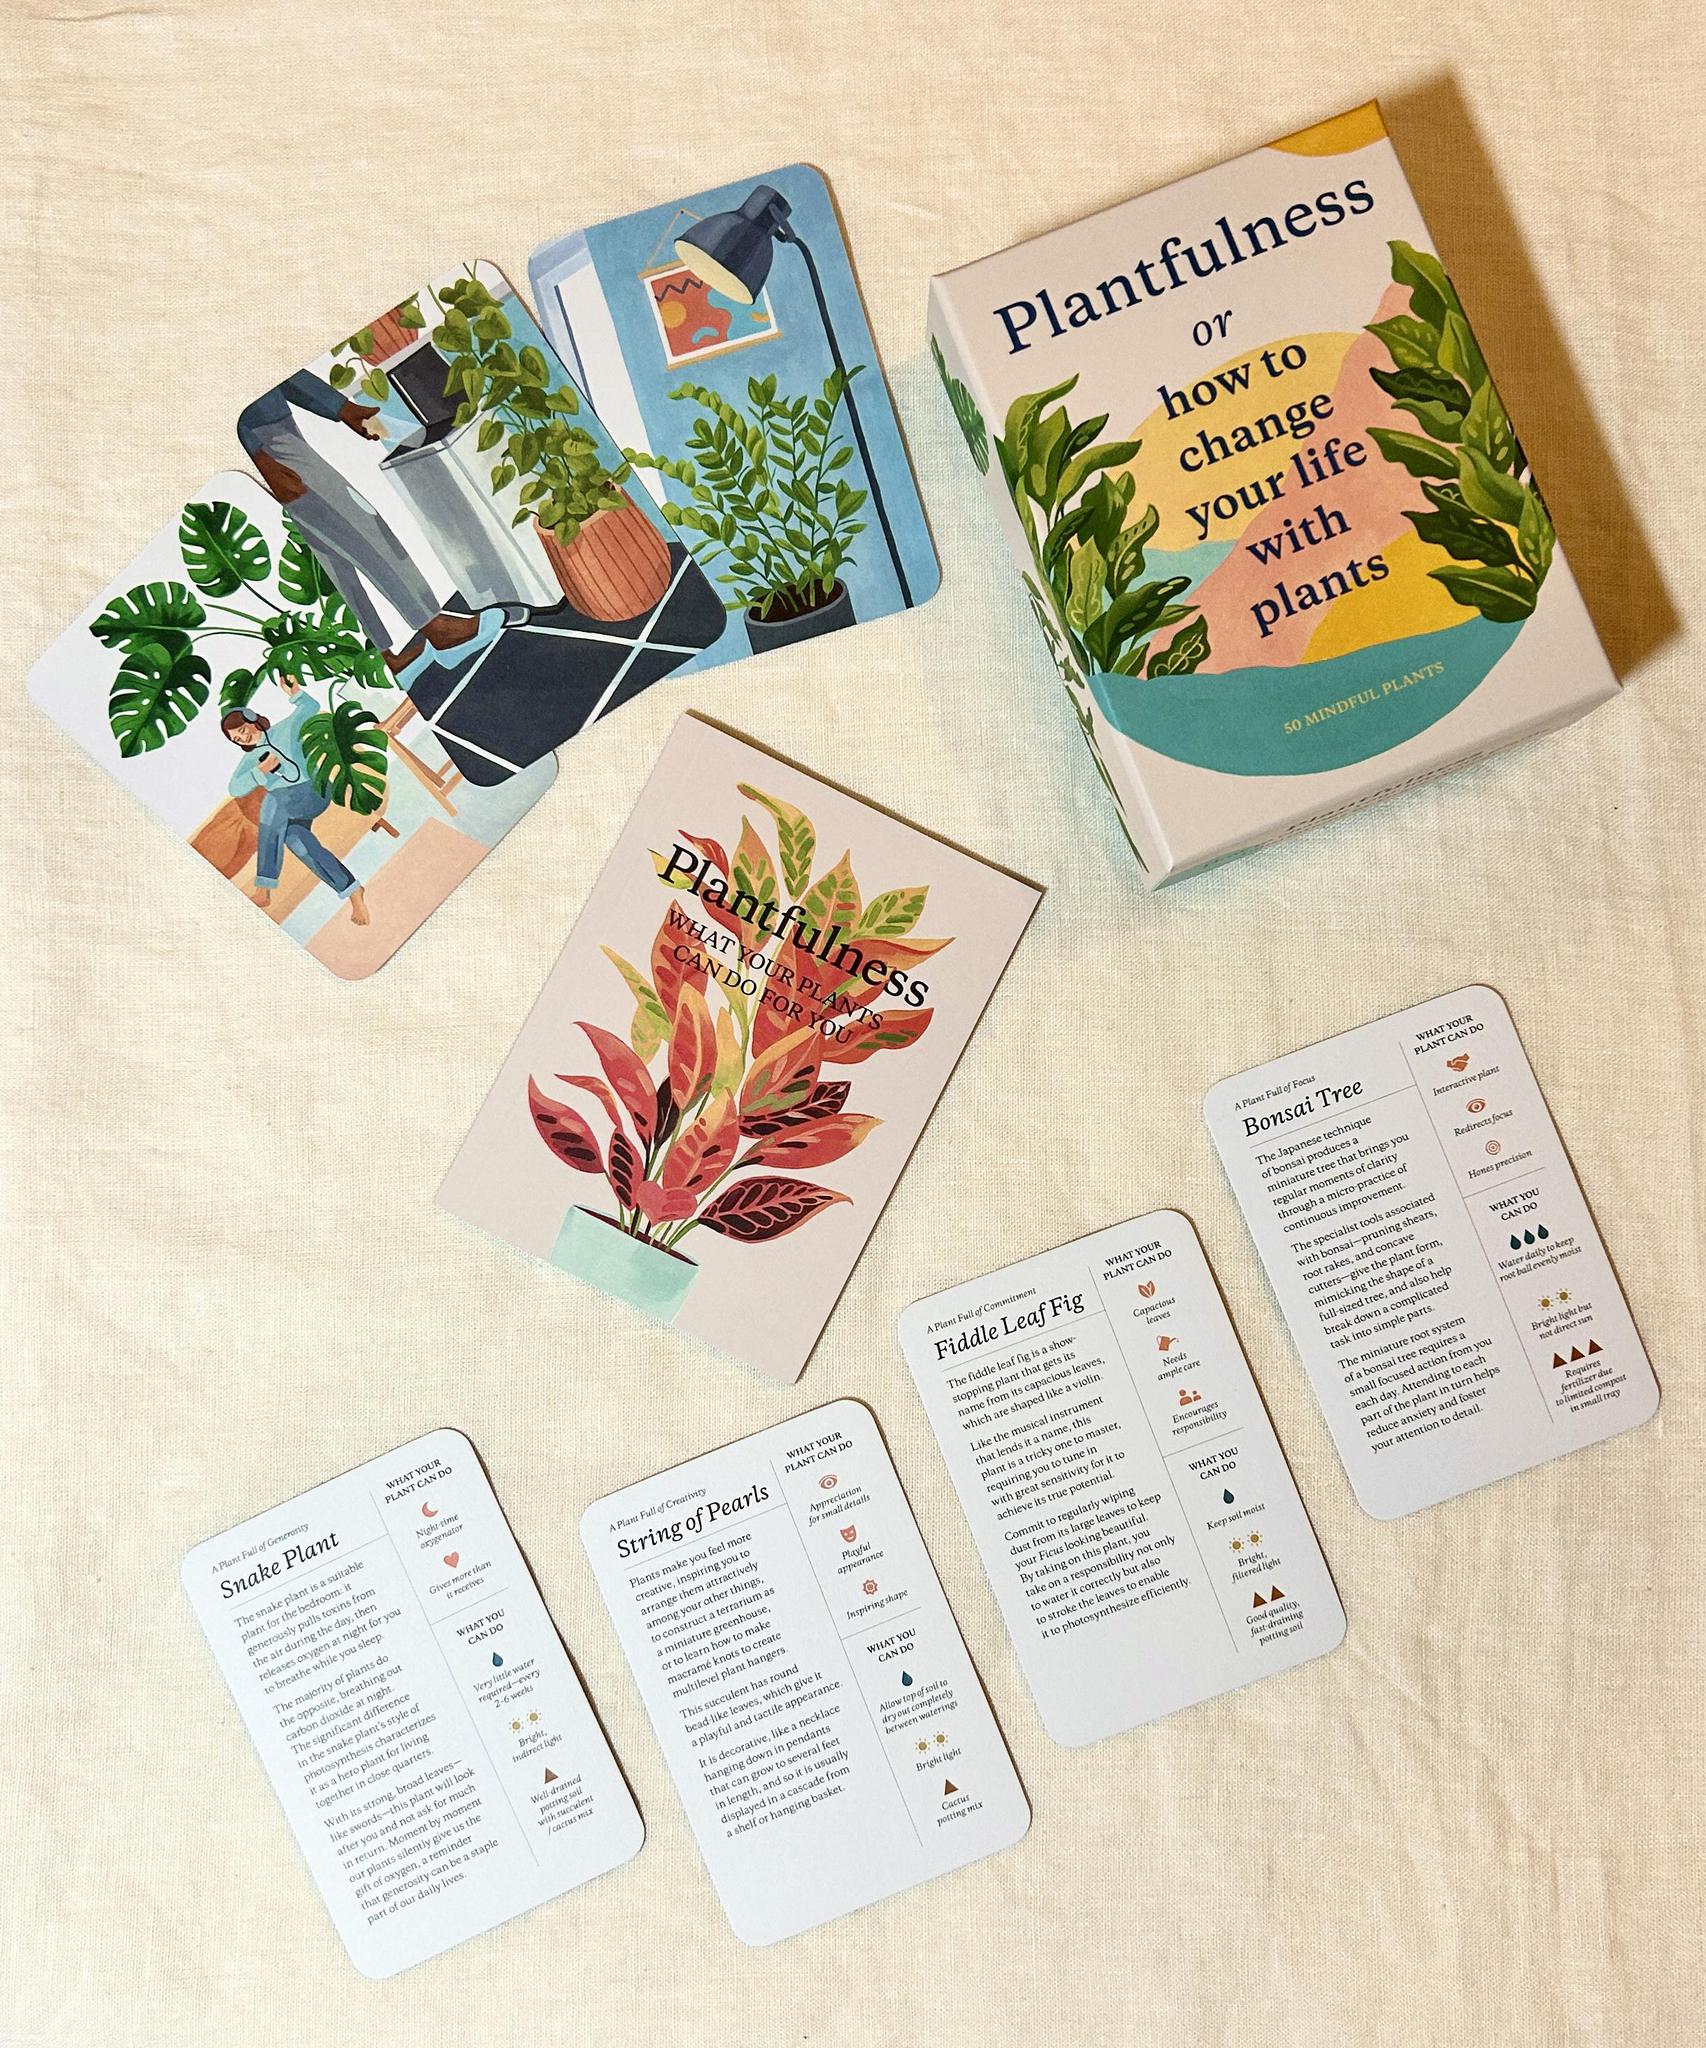 Plantfulness or How to Change Your Life With Plants